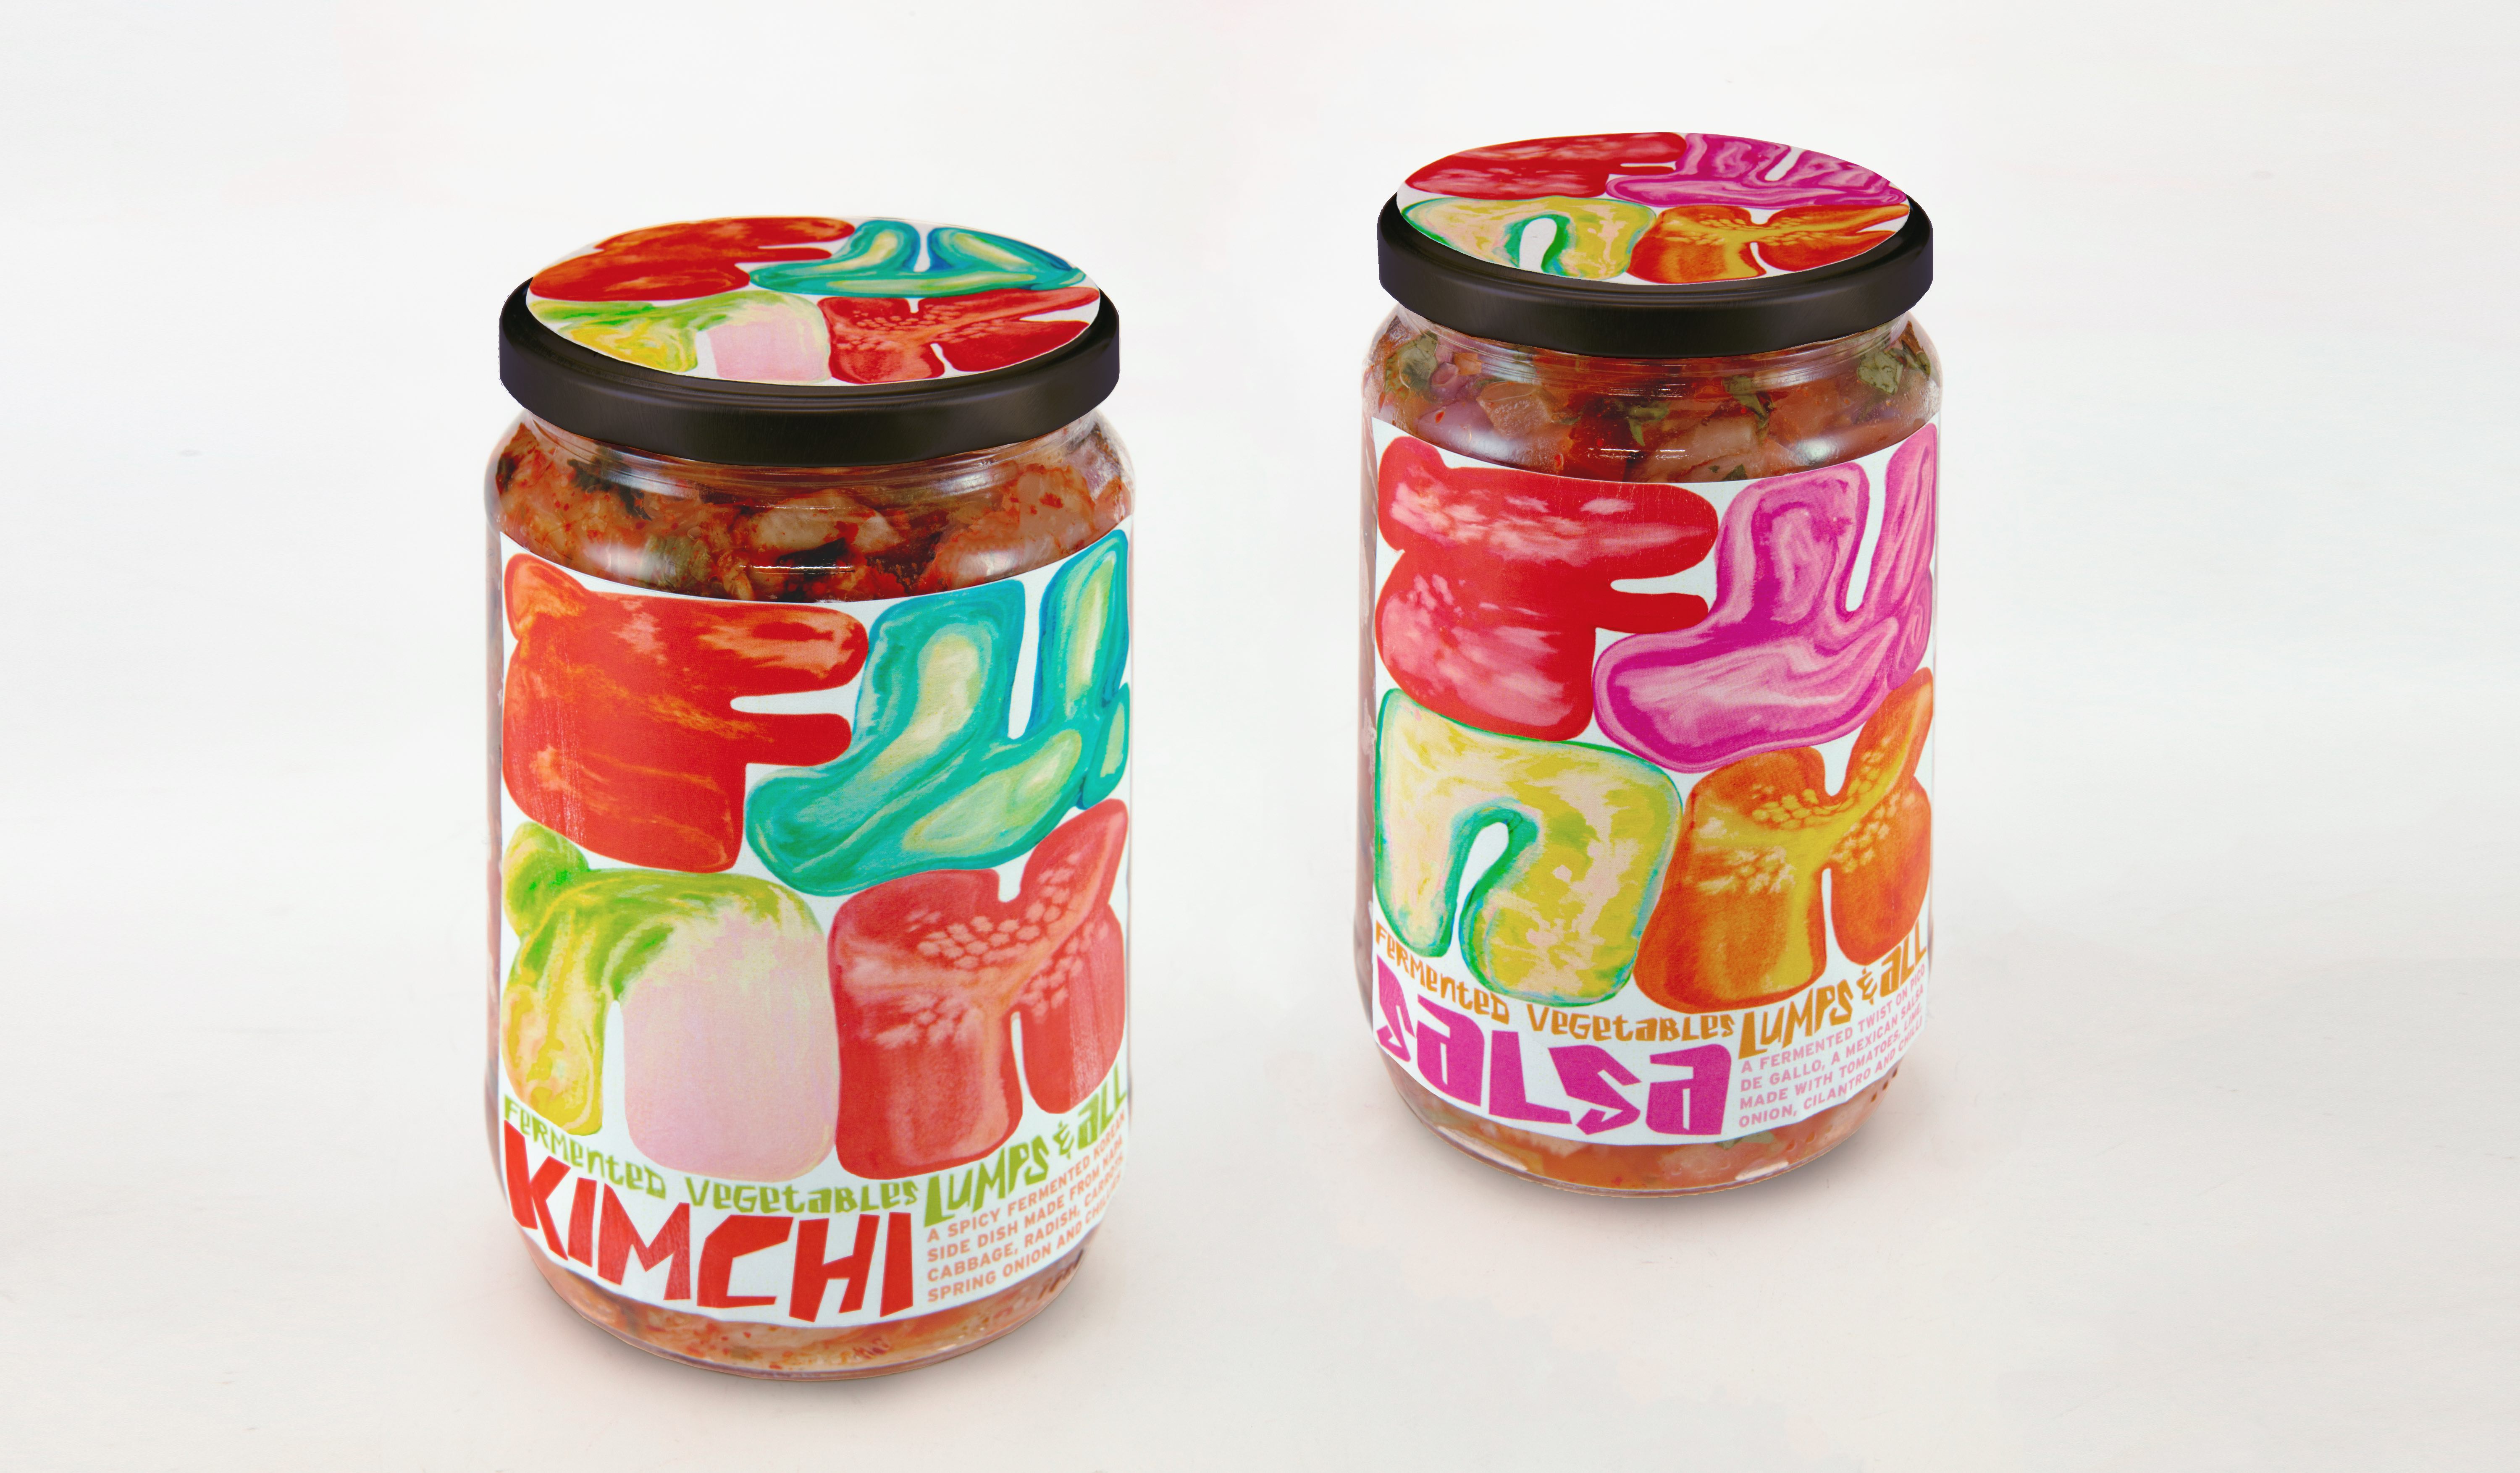 Colourful packaging design by Kimberly Rodrigues for a fermented vegetable brand mocked up onto jars. Funk typography is main focus, colourful, rounded with 'fu' on top line and 'nk' on bottom line.